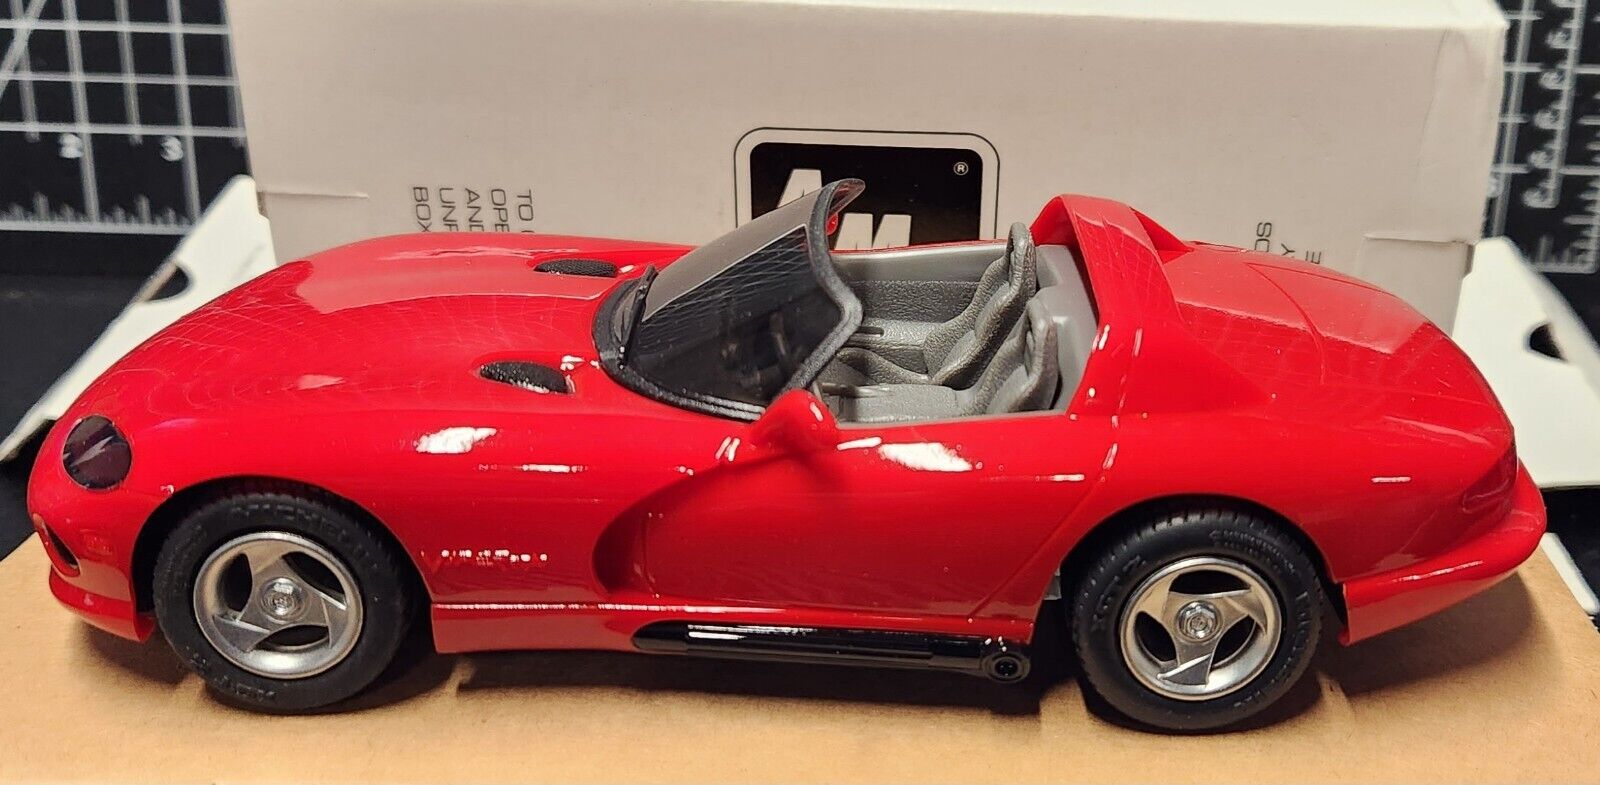 AMT / ERTL 1992 Dodge Viper RT/10 Red 6113 1/25 Scale PROMO ***FREE SHIPPING***